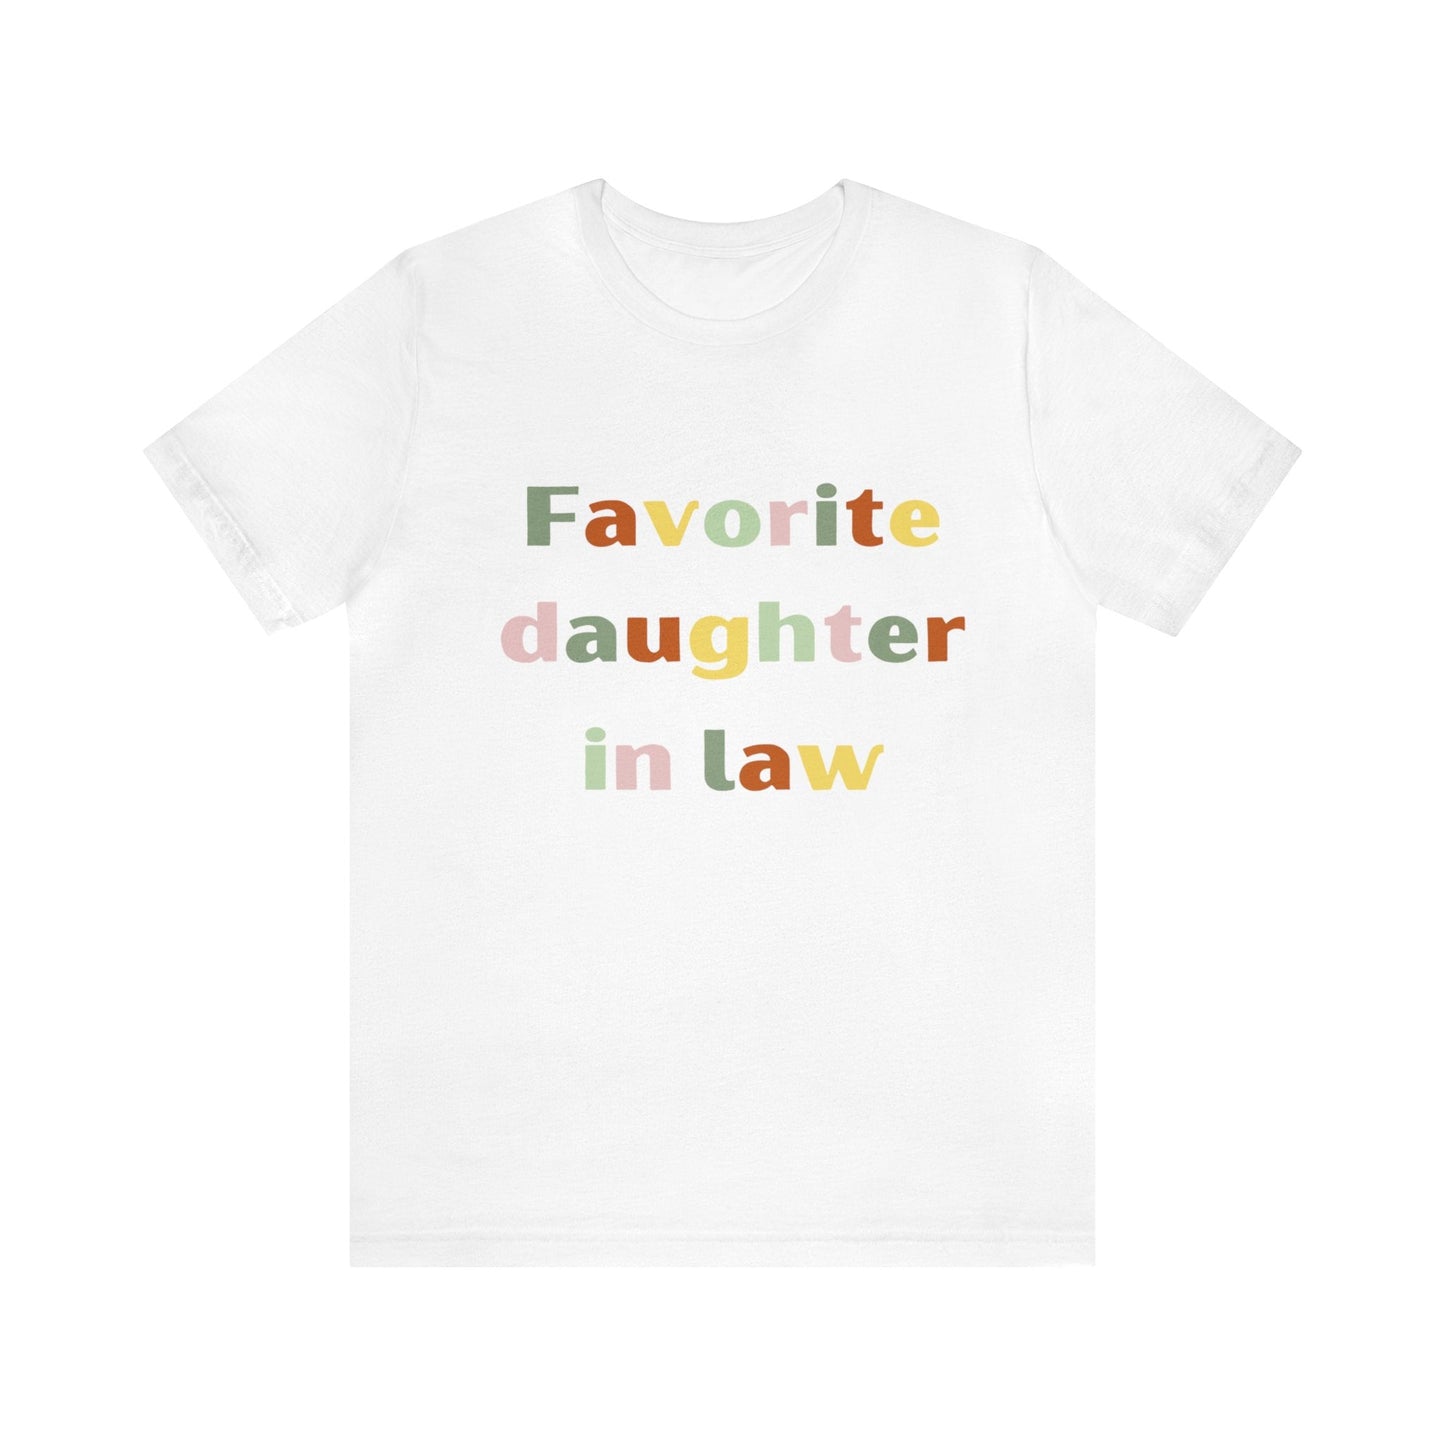 Get trendy with Favorite daughter-in -law tee shirt - T-Shirt available at Good Gift Company. Grab yours for $18 today!